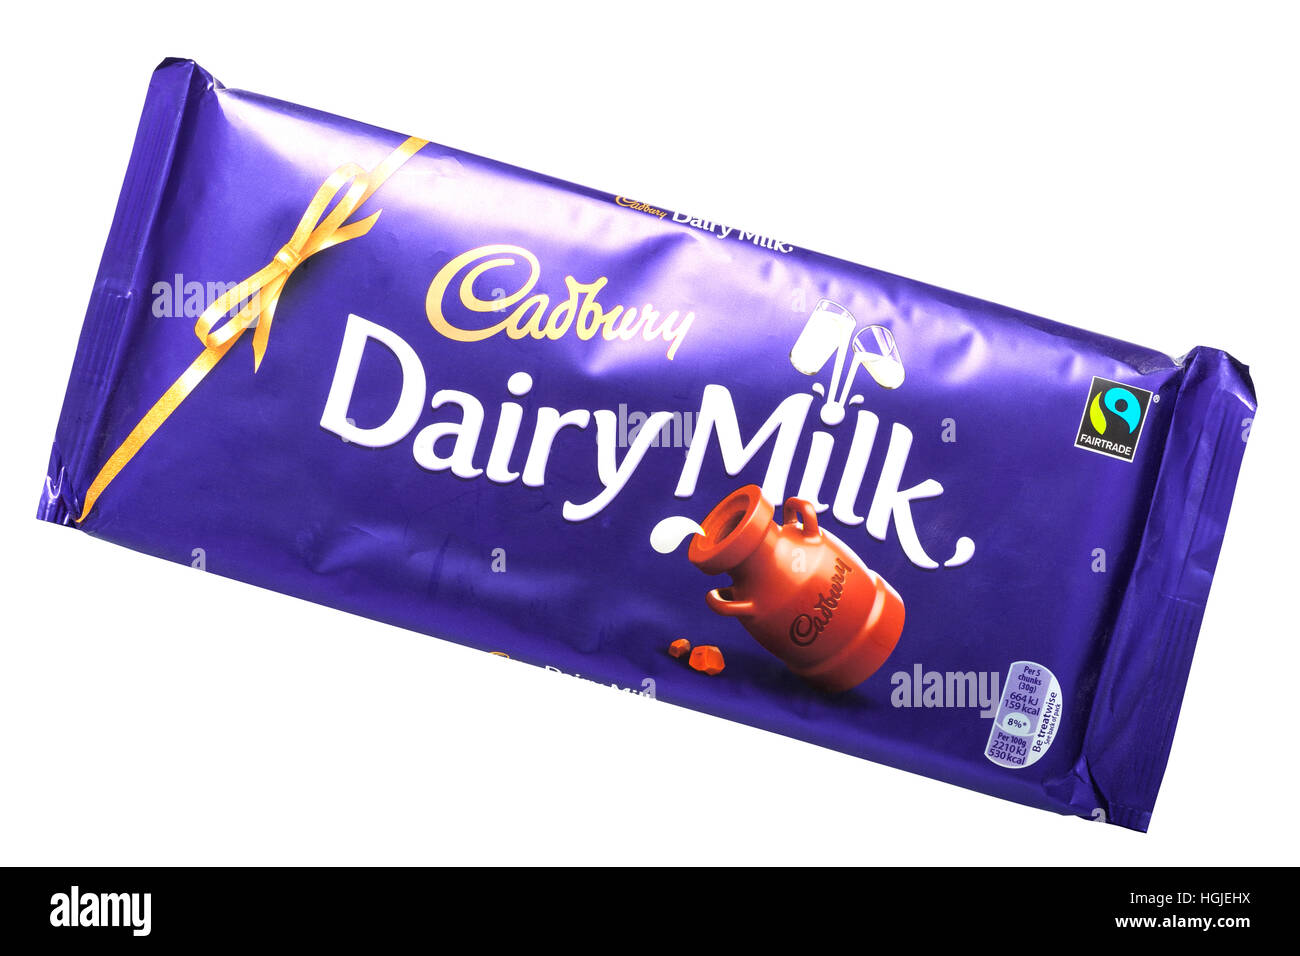 A large bar of Cadbury Dairy Milk Chocolate on a white background Stock Photo